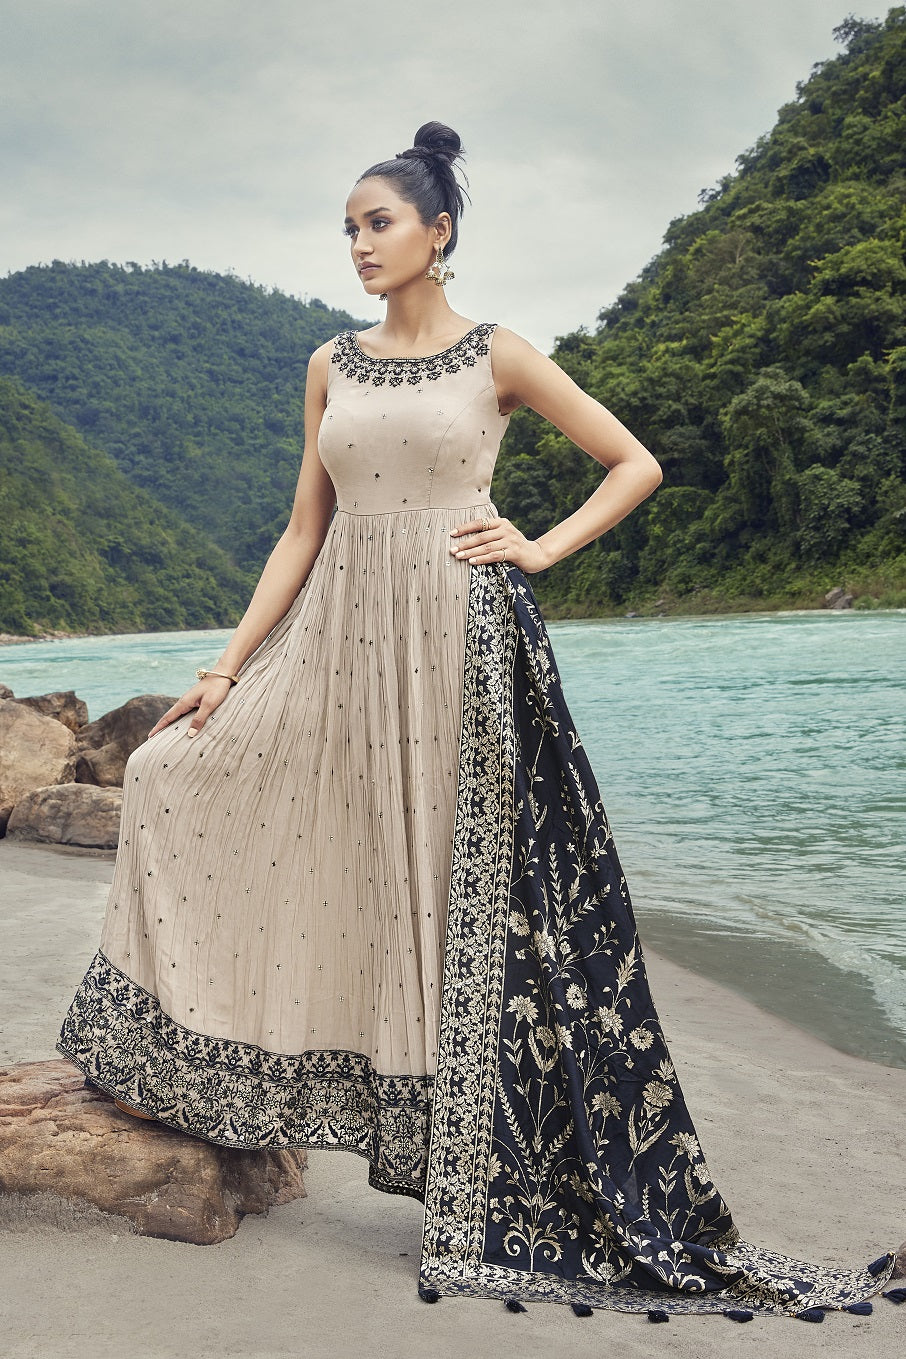 Buy a Beautiful ellow embroidered silk Anarkali suit with a dupatta. Shop online from Pure Elegance. Dazzle on weddings and special occasions with exquisite Indian designer dresses, sharara suits, Anarkali suits, and wedding lehengas from Pure Elegance Indian fashion store in the USA.